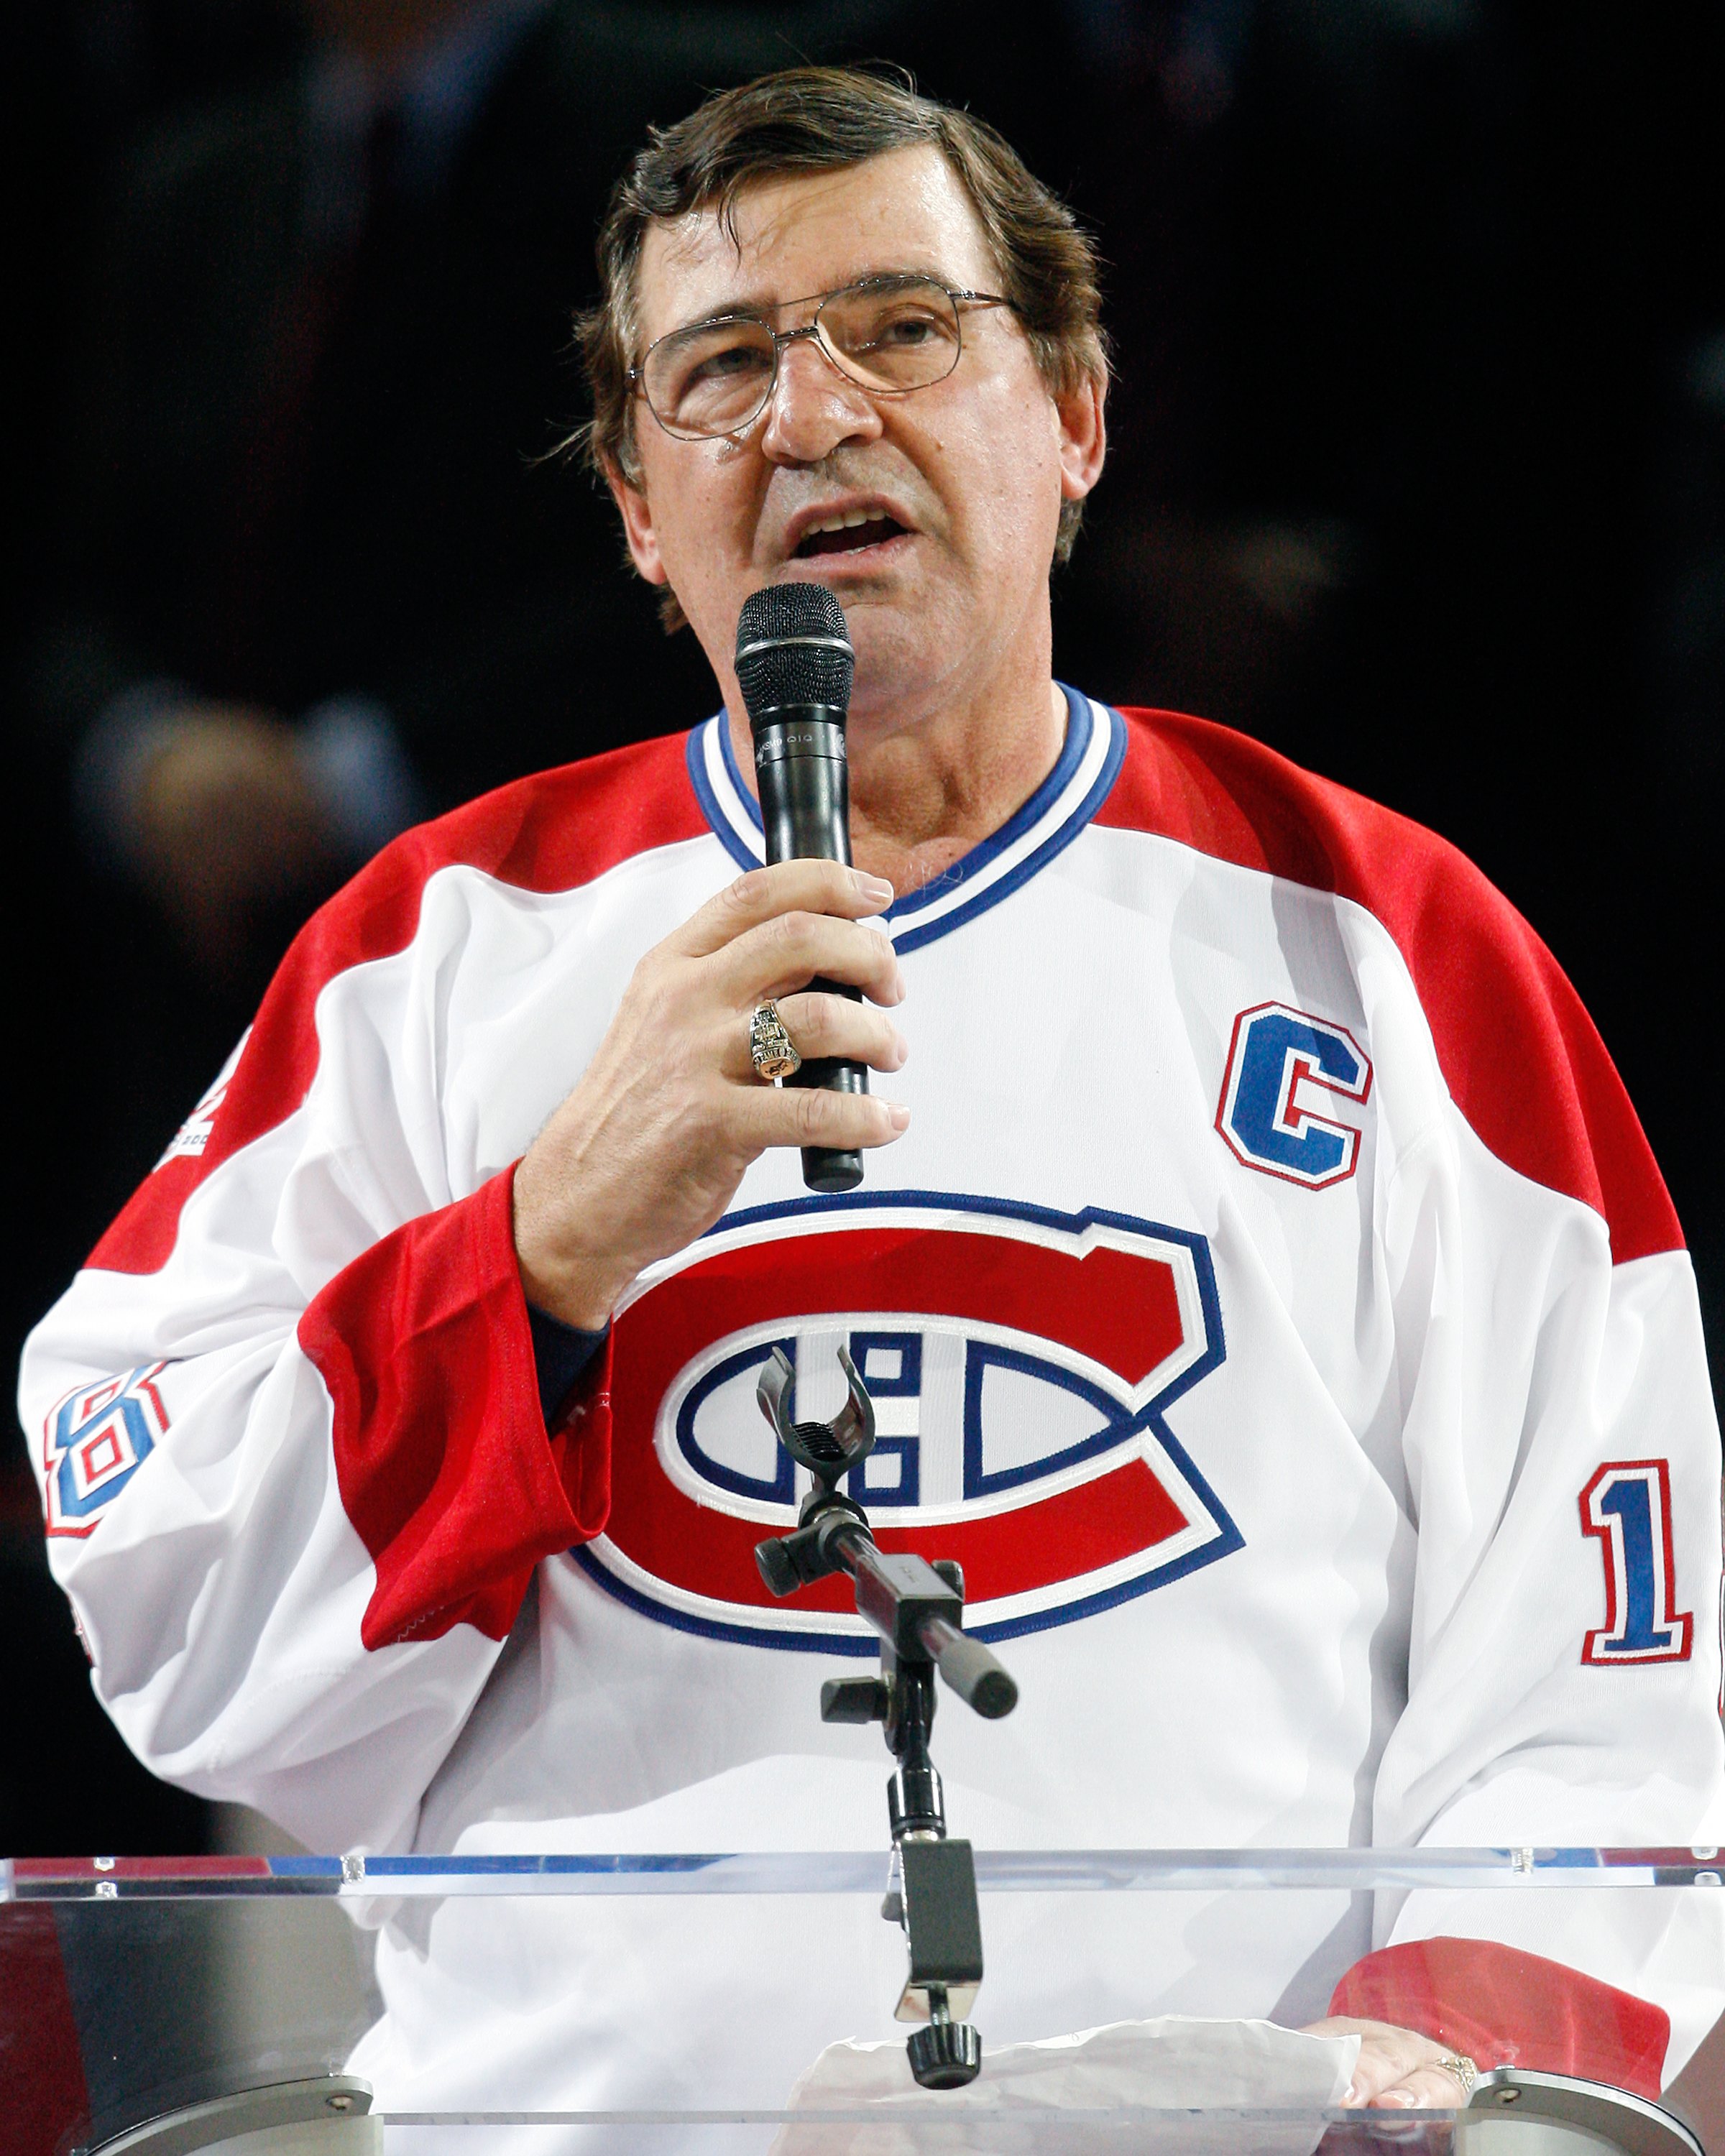 NHL: Three Former Players That Deserve to Have Their Number Retired